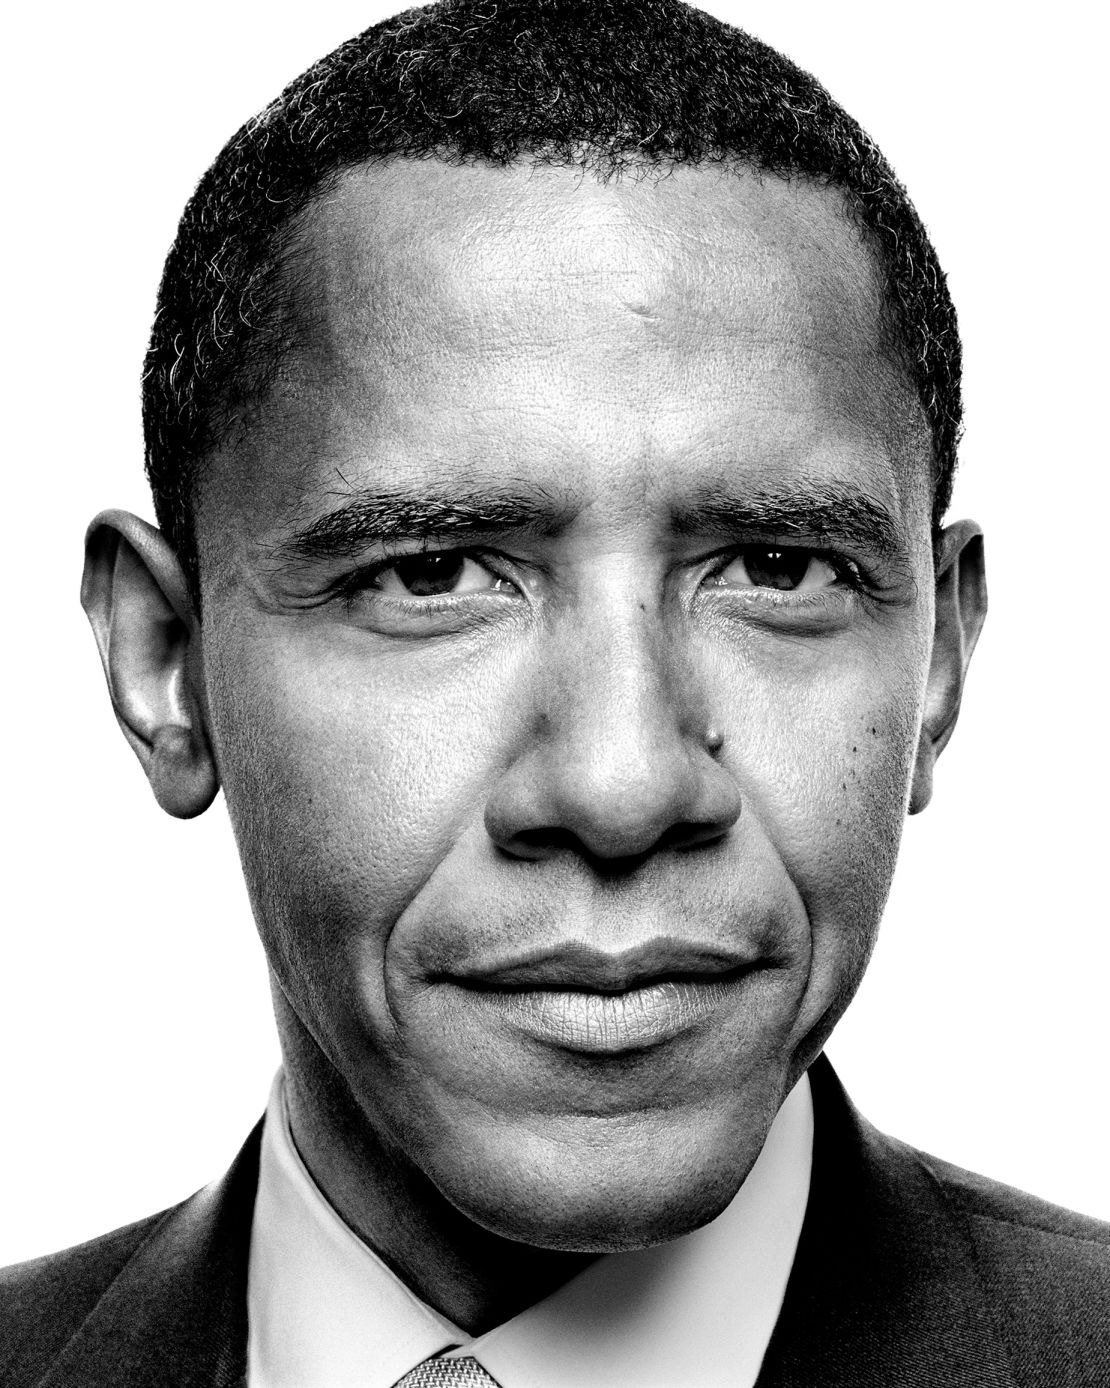 Barack Obama taken in 2006 before he ran for president. For some world leaders, the scarcity of Platon's minimalist set can be liberating.